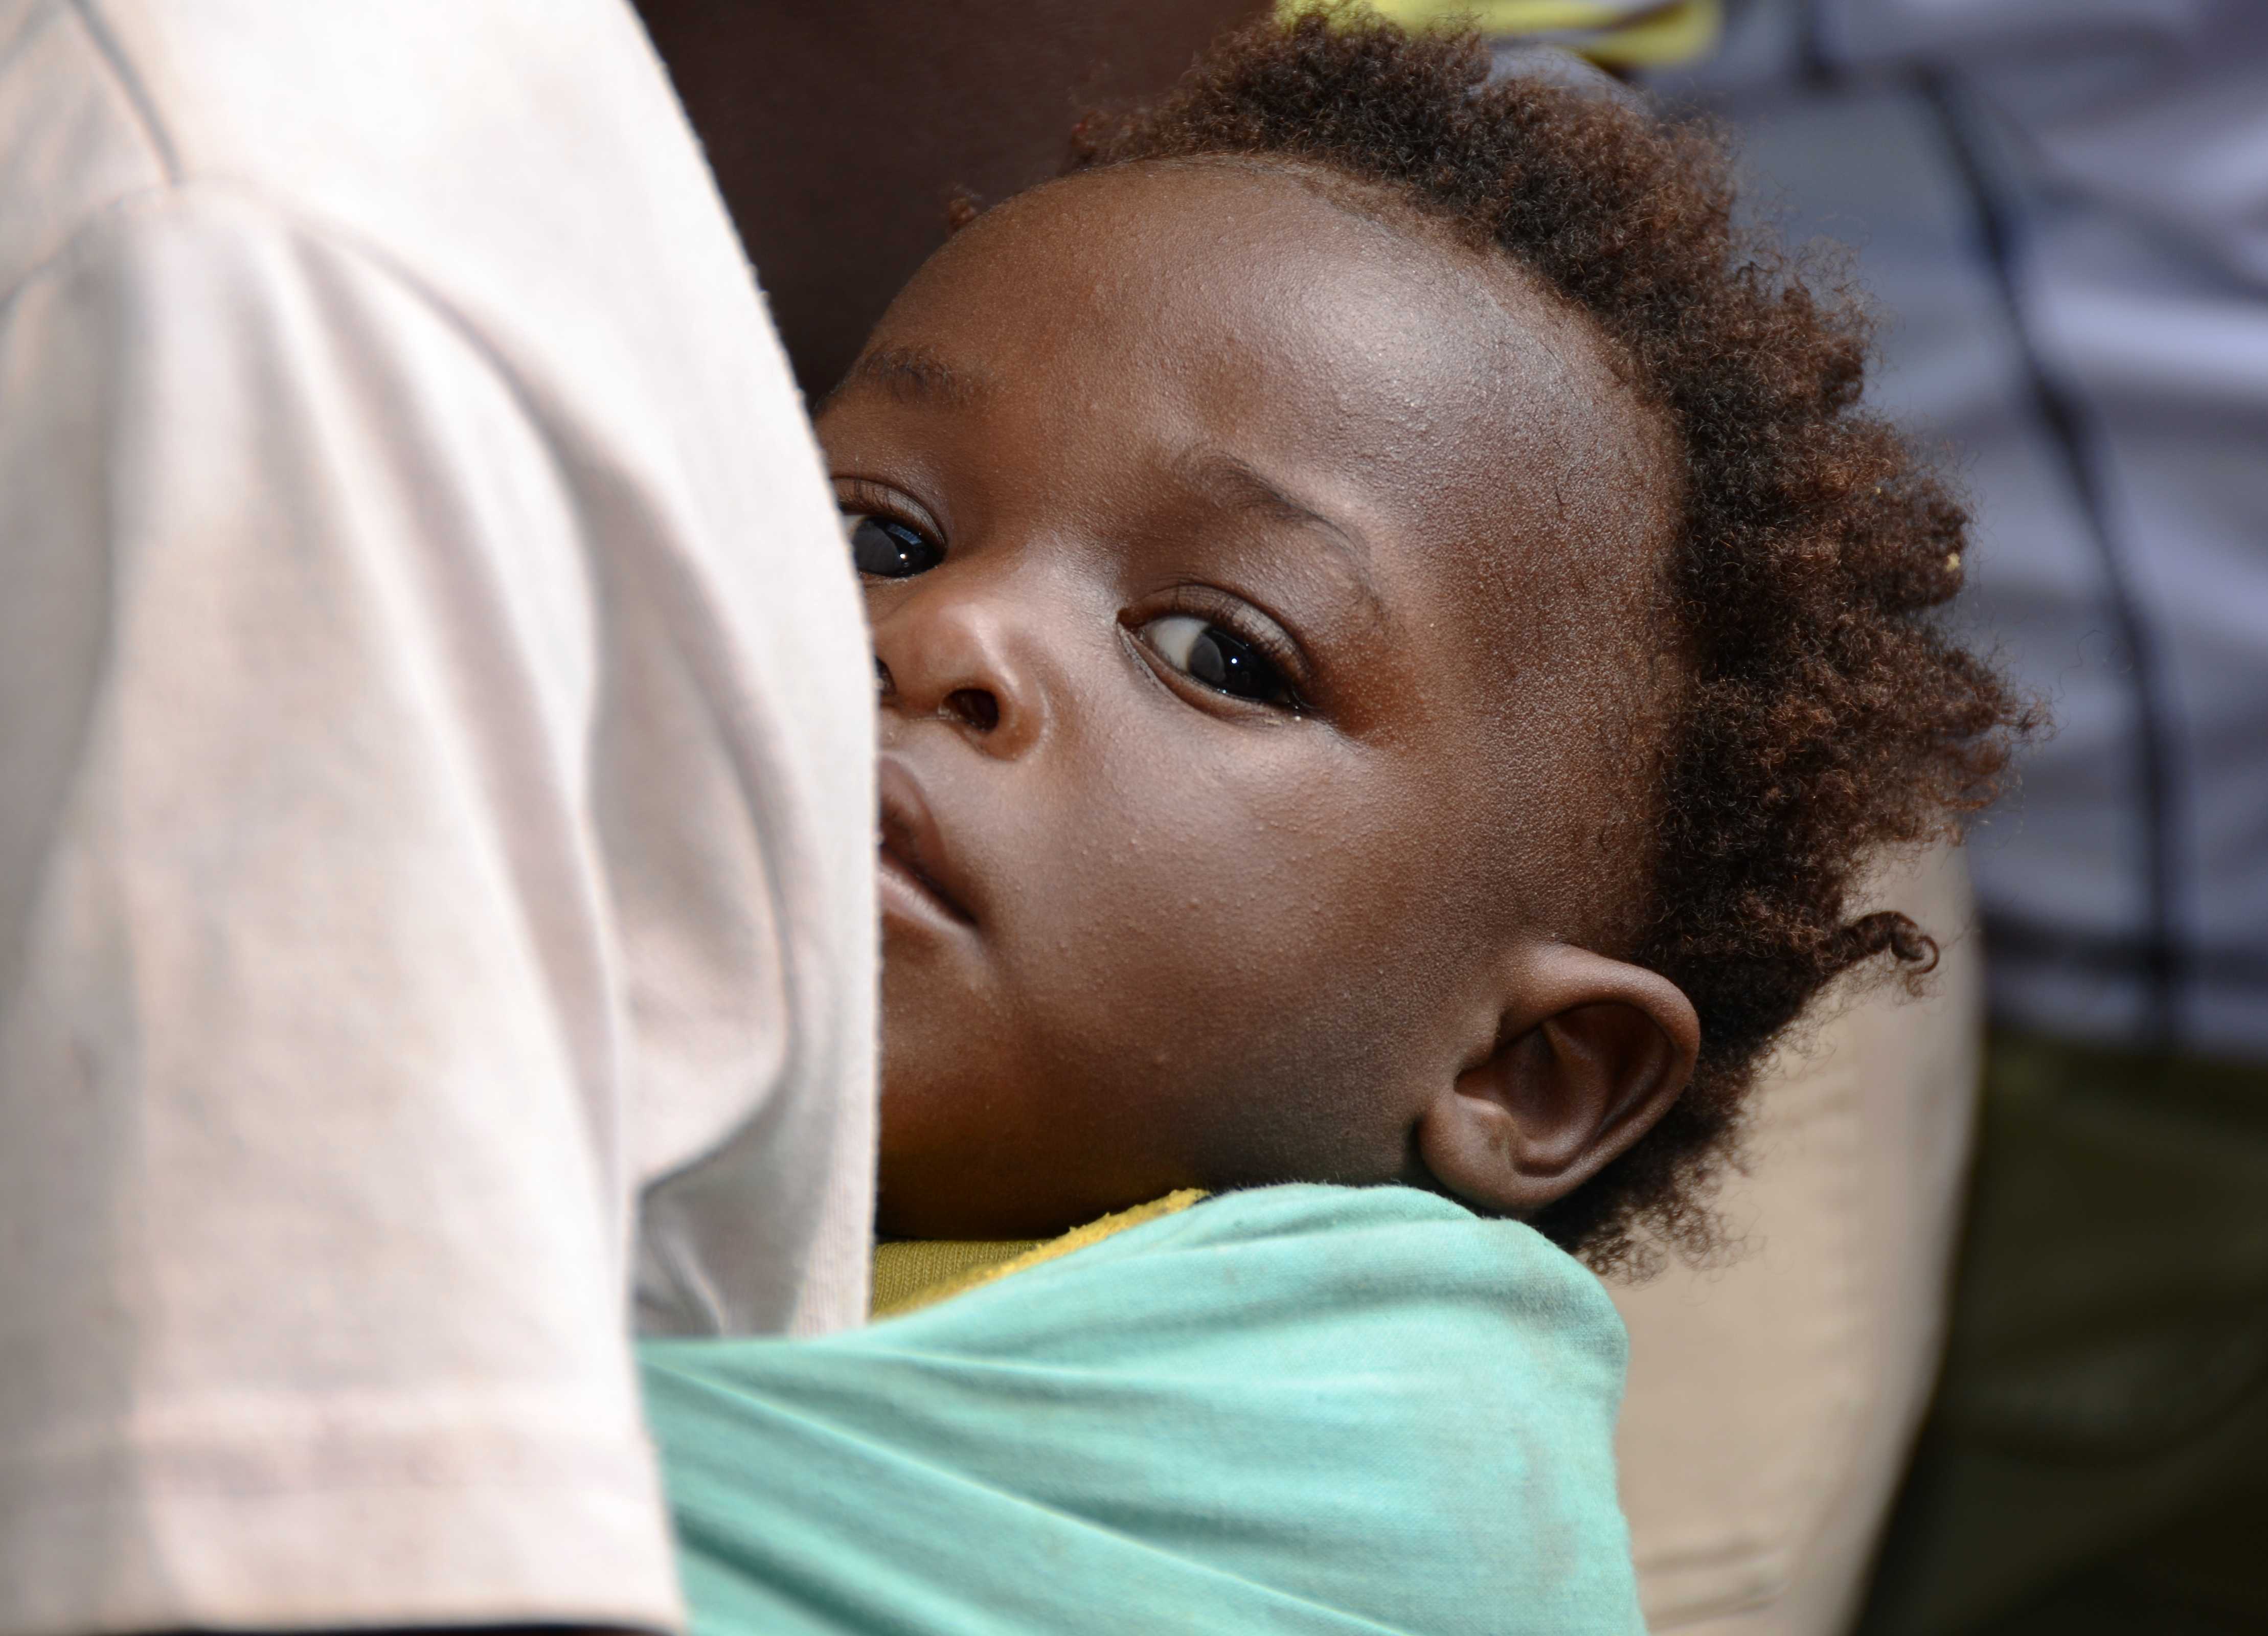 Fewer and fewer Ugandan babies are being born HIV-infected thanks to national efforts, supported by PEPFAR, to eliminate mother-to-child transmission of HIV.